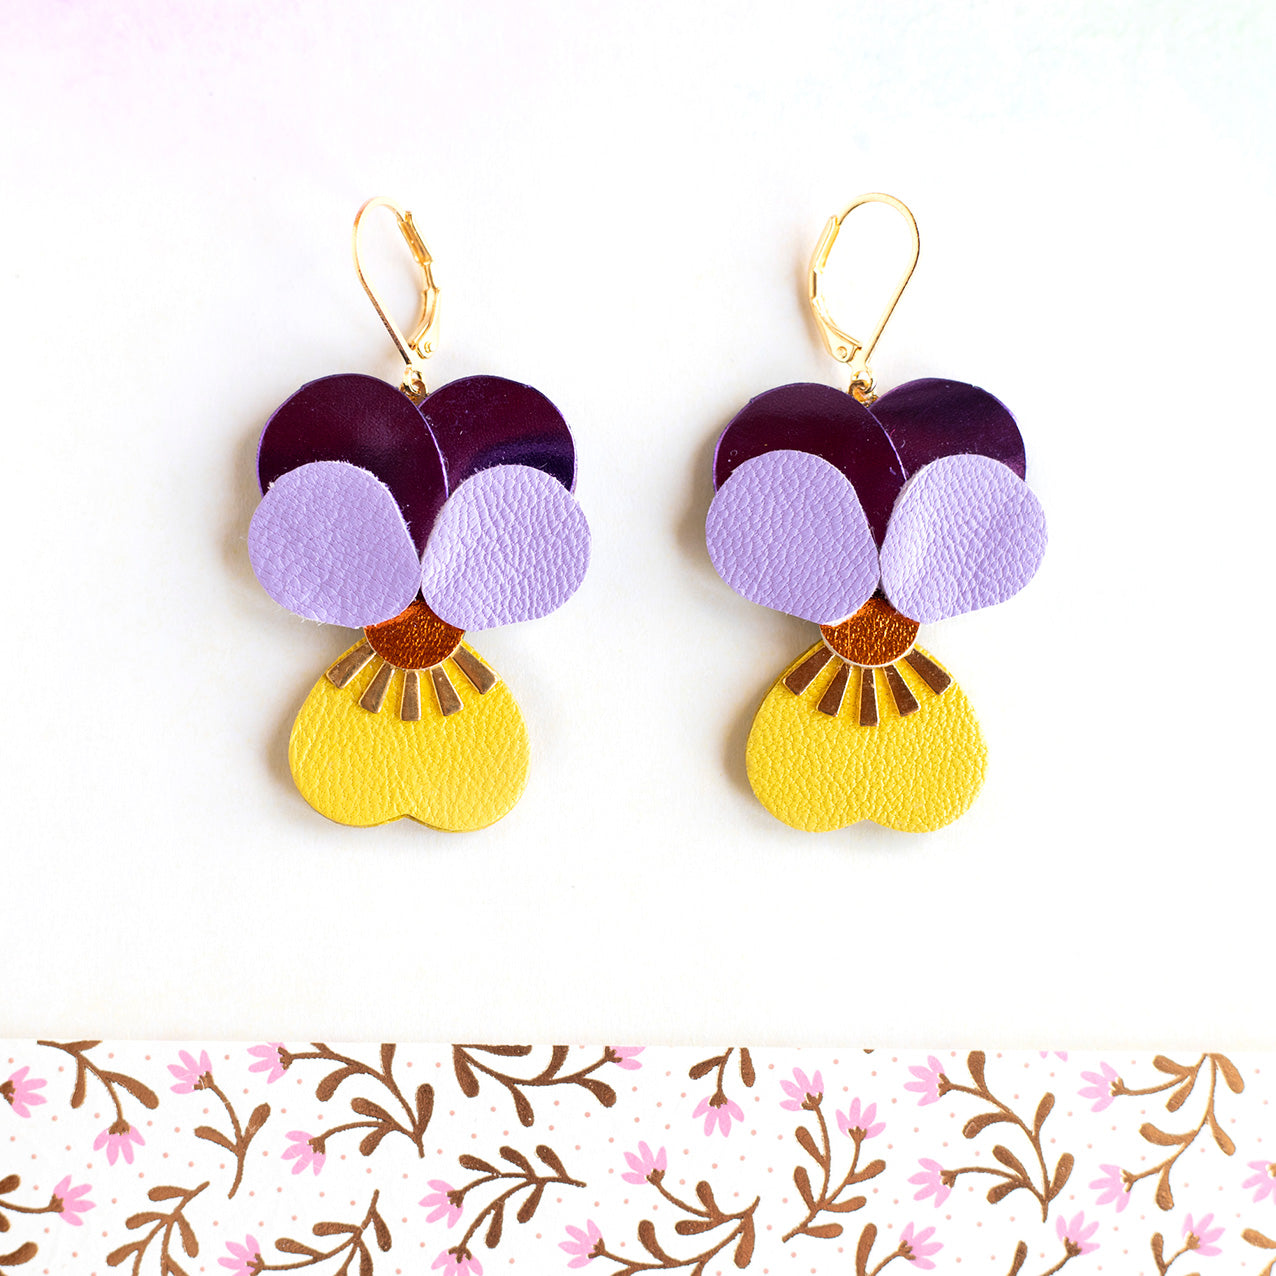 Pansies earrings - mauve purple and yellow